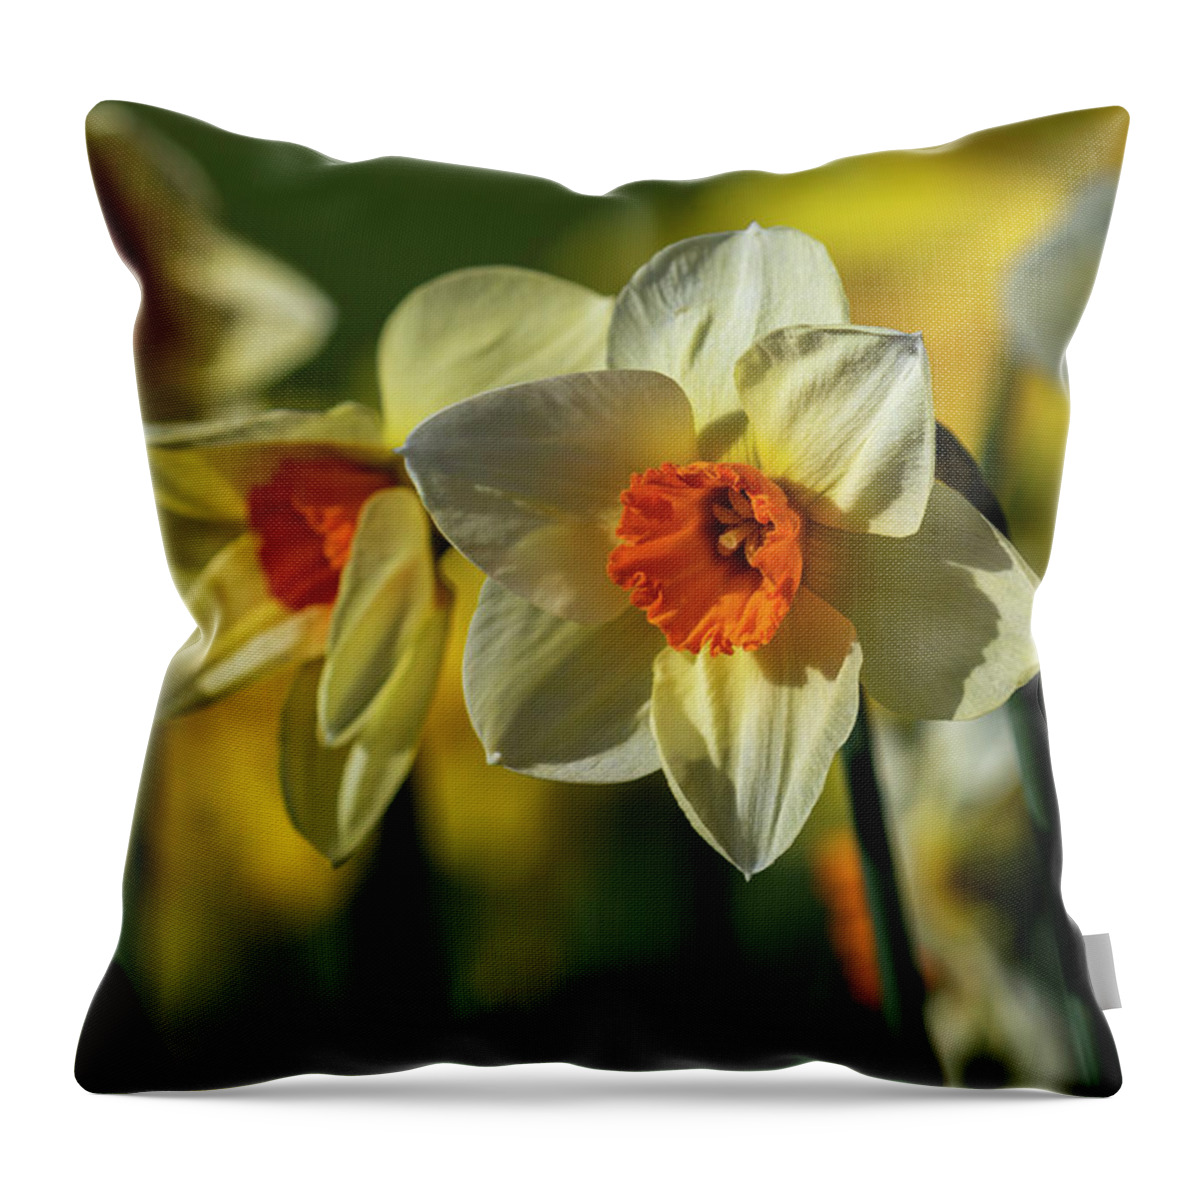 Afternoon Throw Pillow featuring the photograph Narcissus Bed by Robert Potts